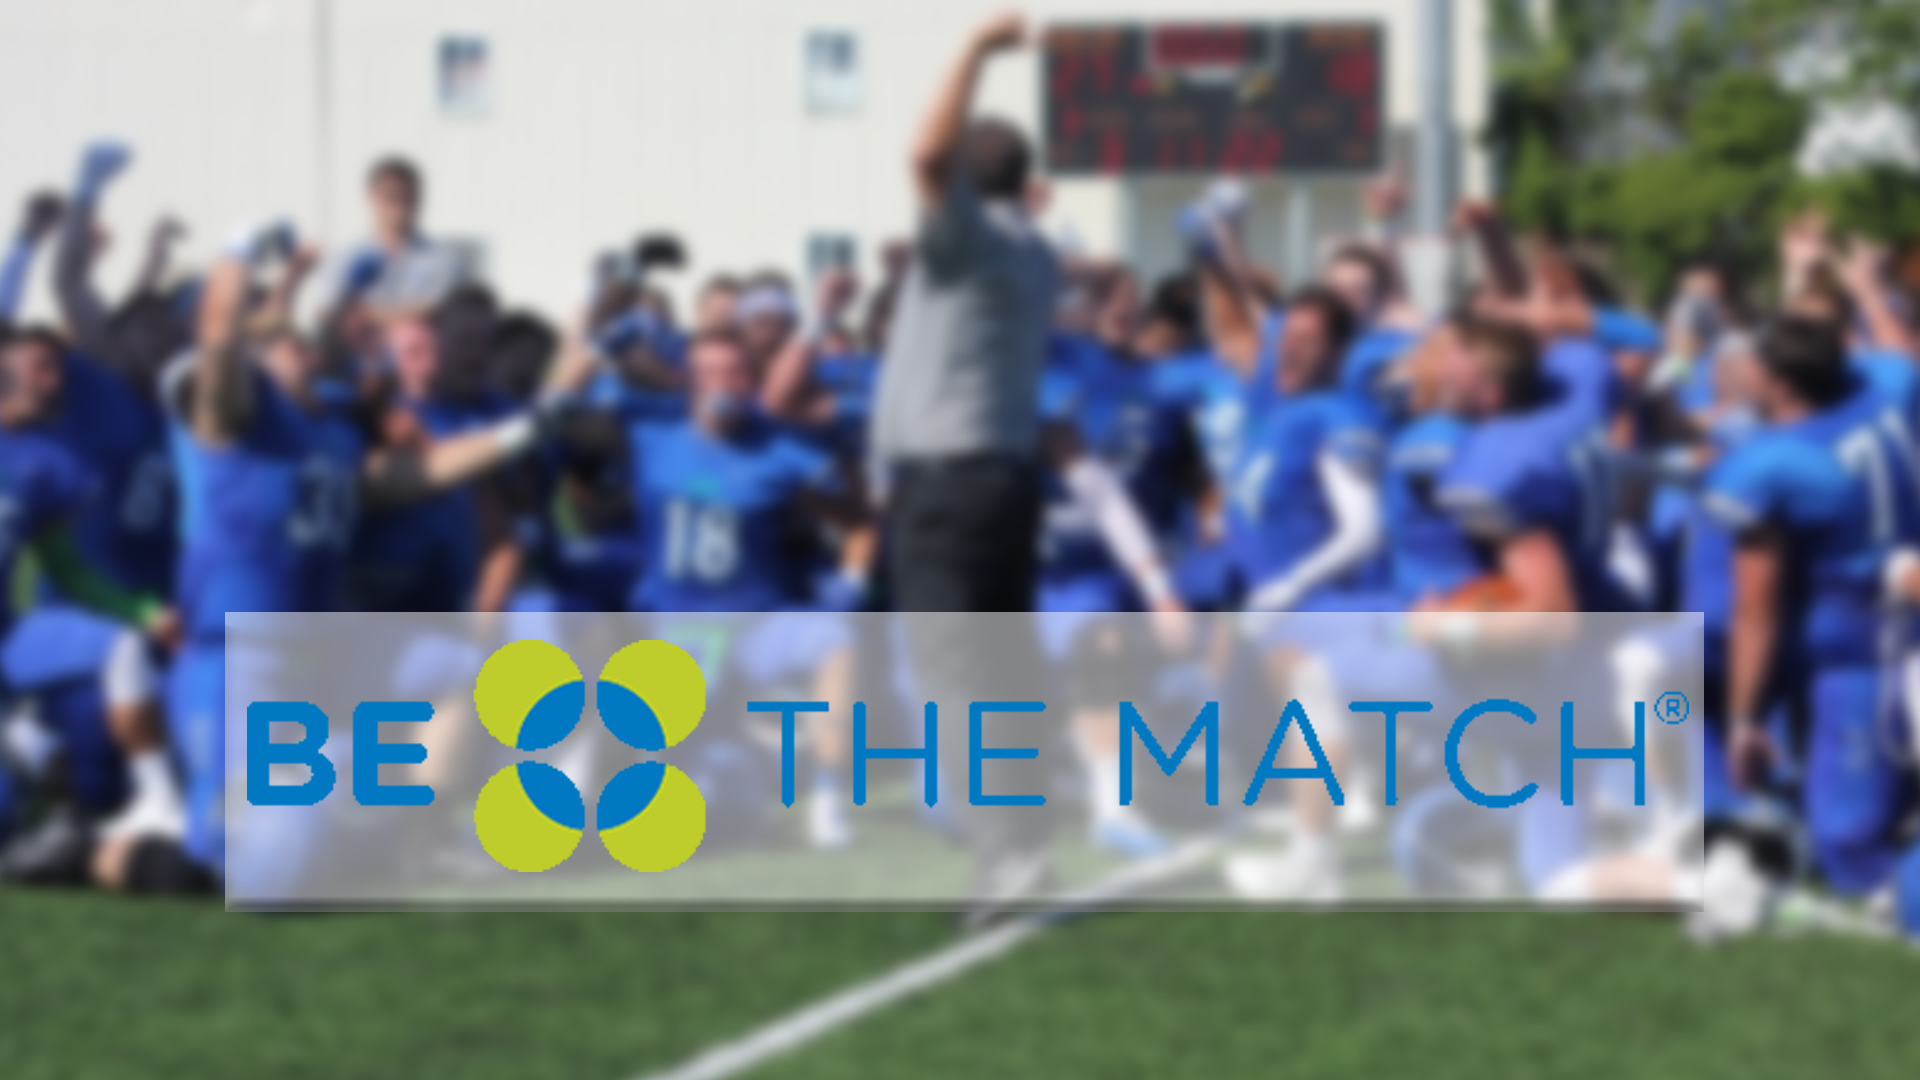 The Salve Regina University football team hosts its annual "Be the Match" drive this Thursday to help find bone marrow matches for patients in need.